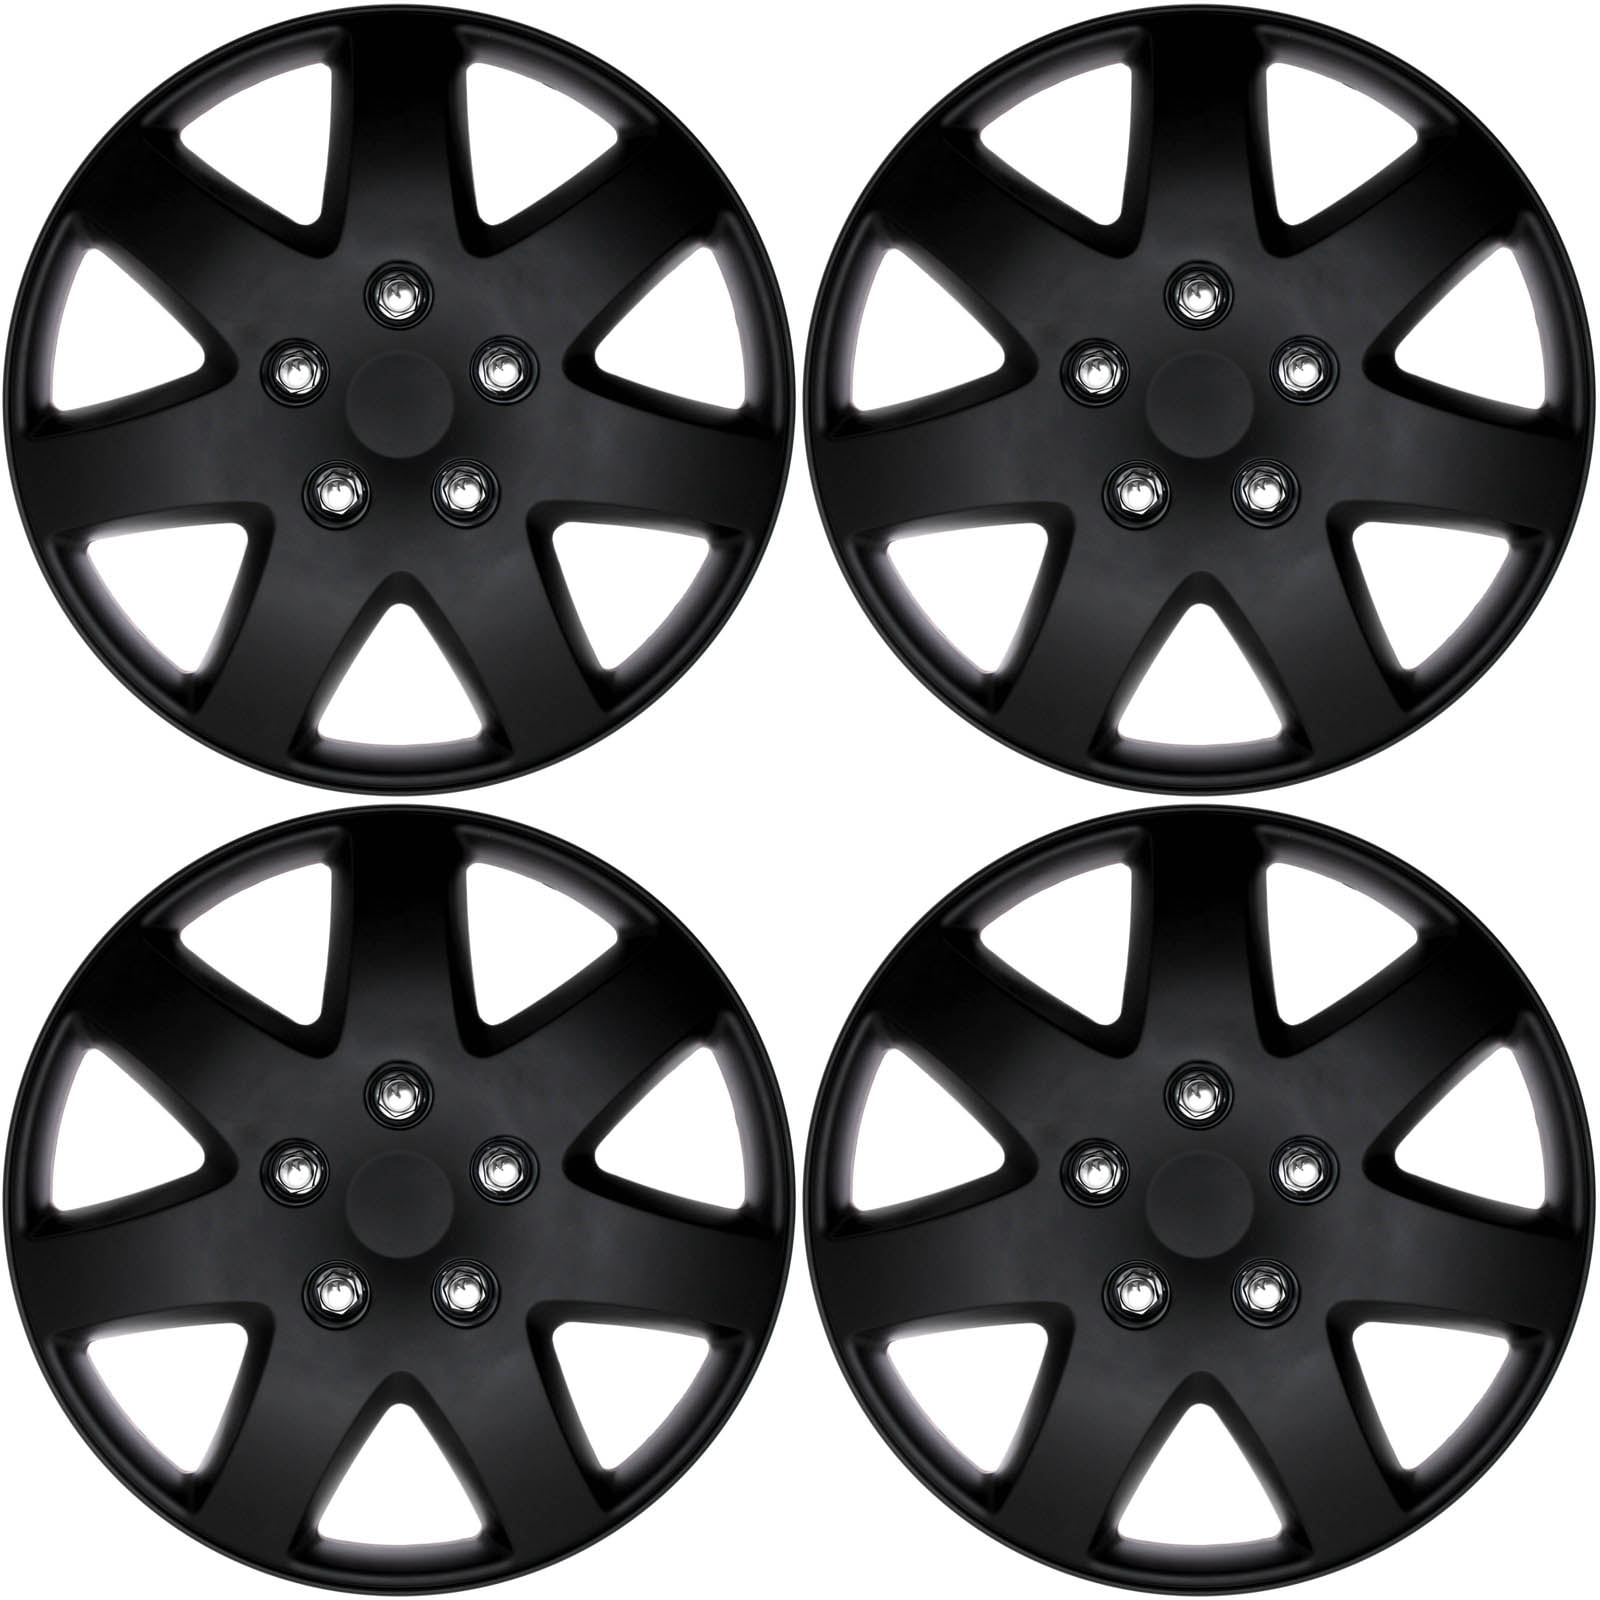 Pack of 4 SPA Hubcaps for Standard Steel Wheels Wheel Covers Fits 14 Inch Wheel, Blue /& Black Snap On